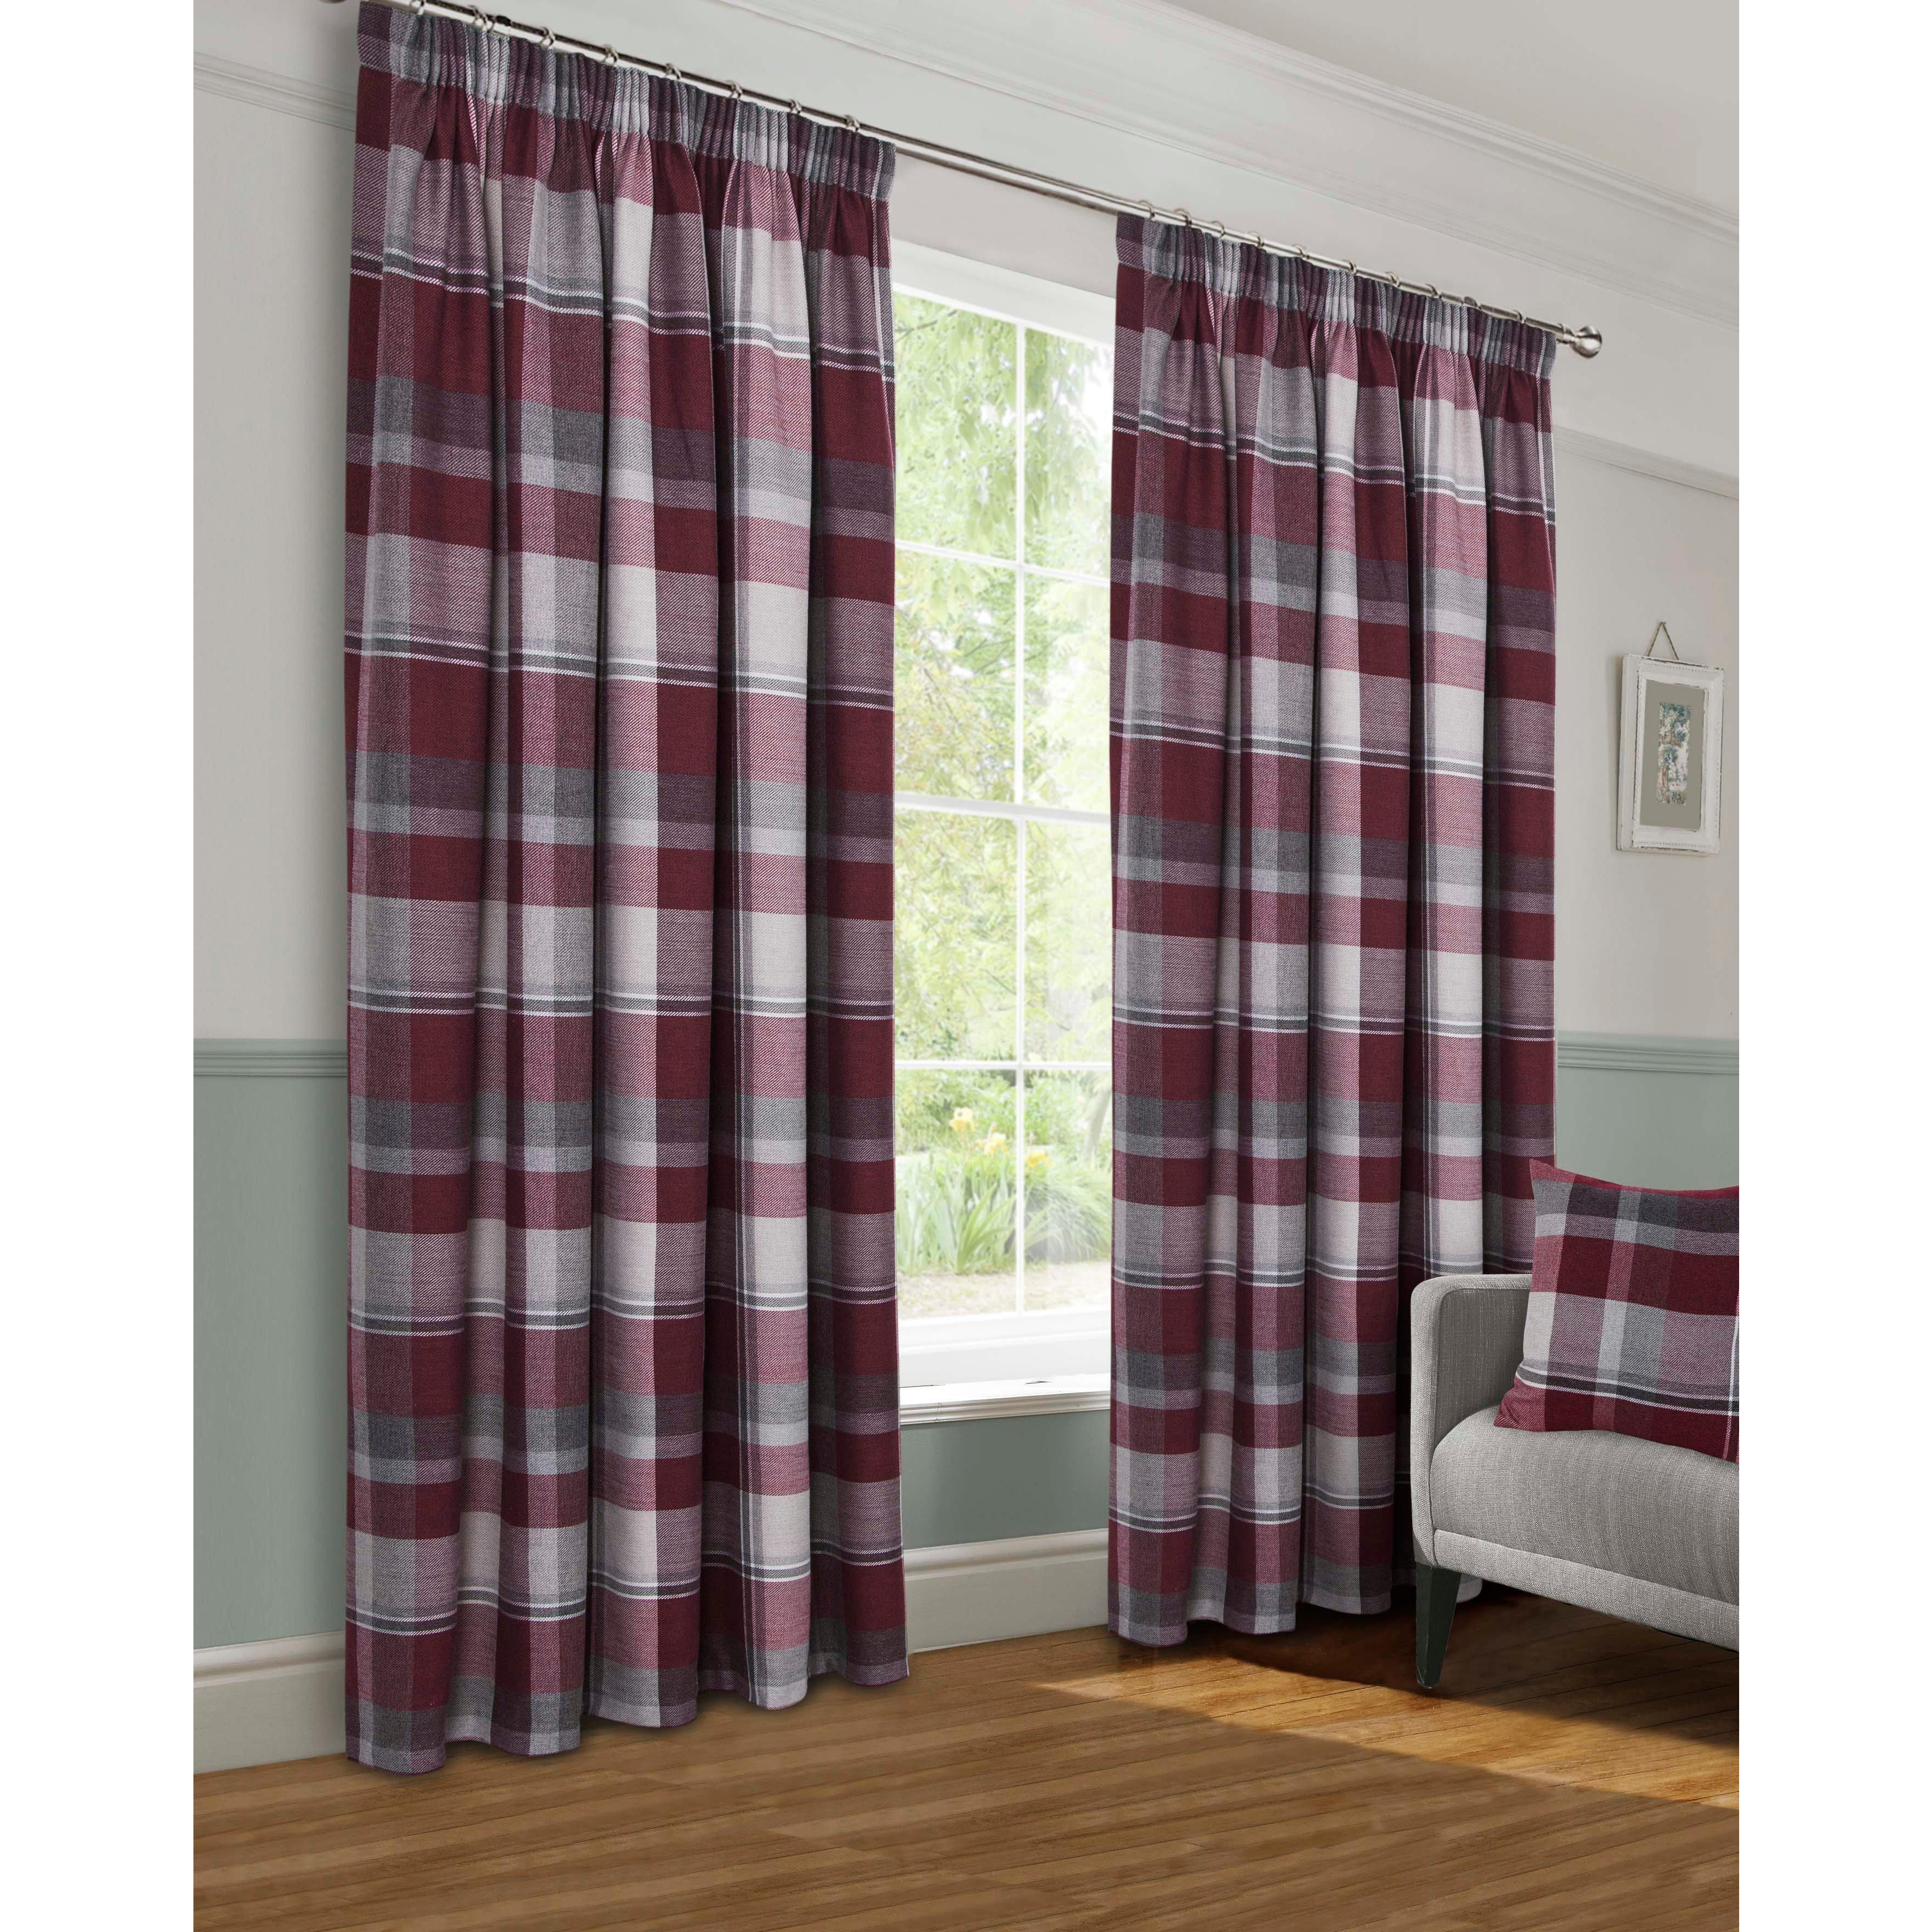 Braemar Faux Wool Fully Lined 3 Inches Pencil Pleat Curtains pair - image 1